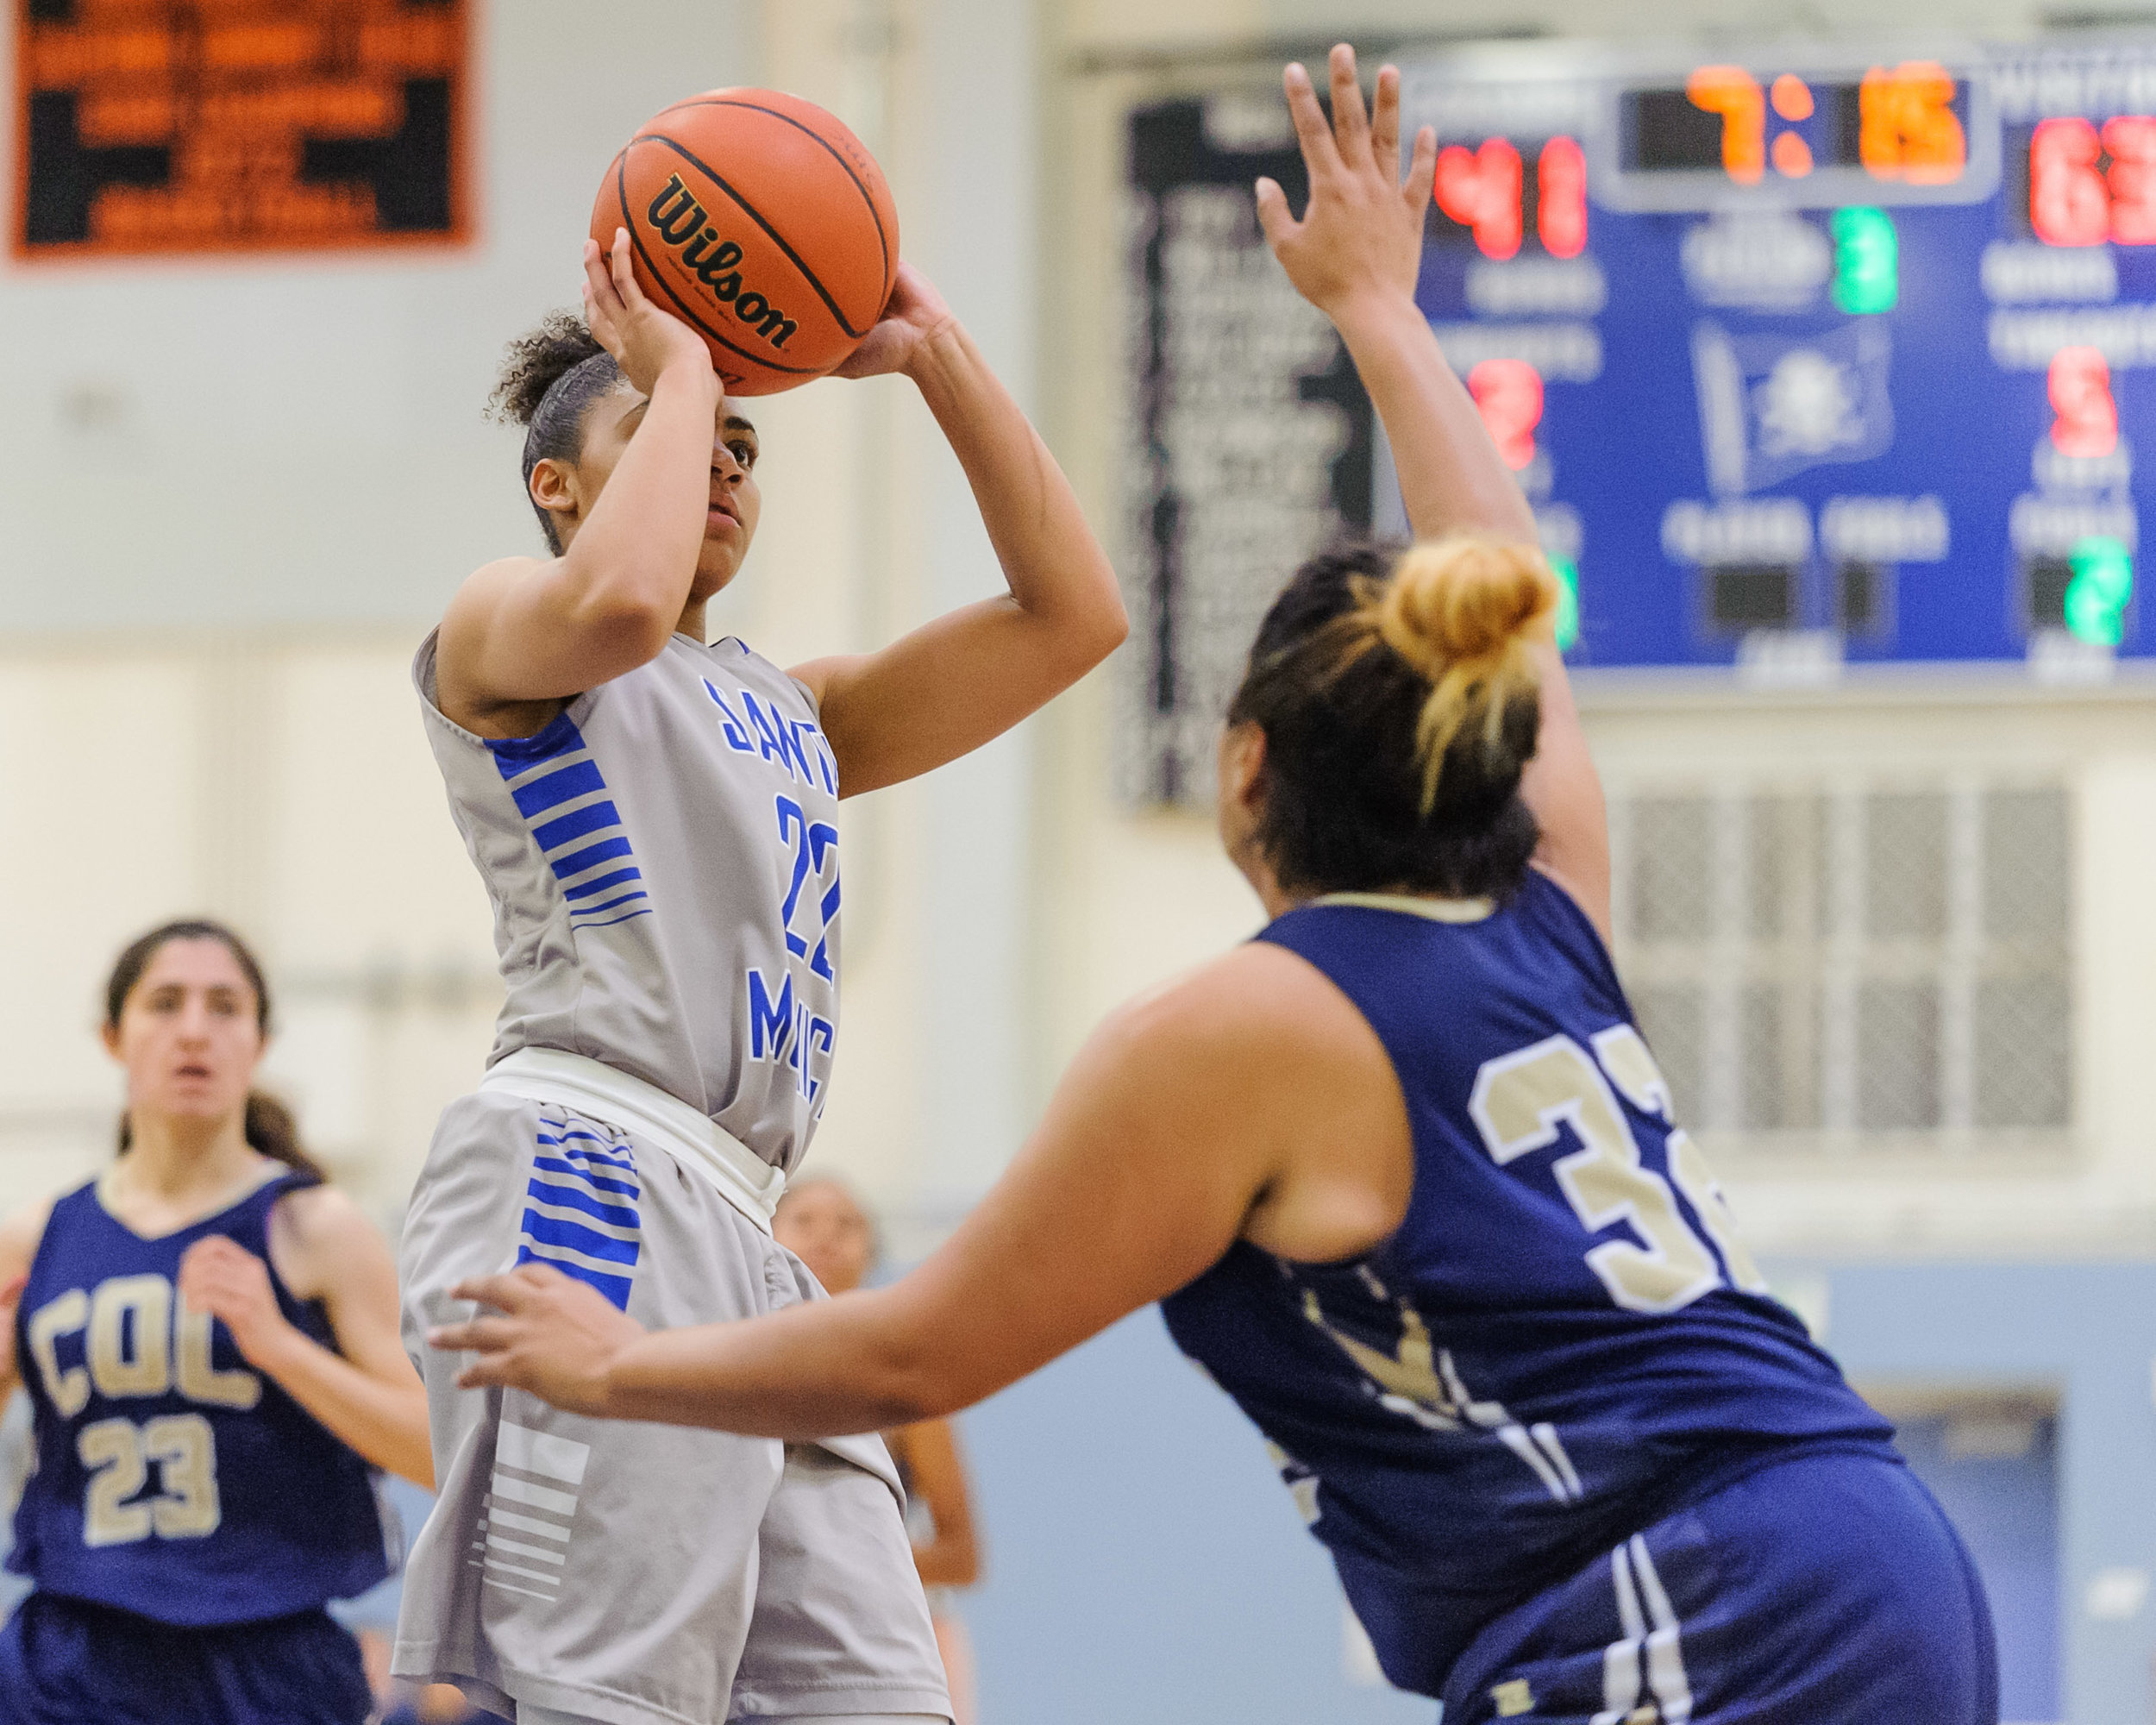  Jinea Cole (22,Left) of Santa Monica College goes up for a shot attempt as Janeth Cruz (32,Right) of the College of the Canyons closes in to contest Cole. The Santa Monica College Corsairs lose the game 108-70 to the College of the Canyons Cougars. 